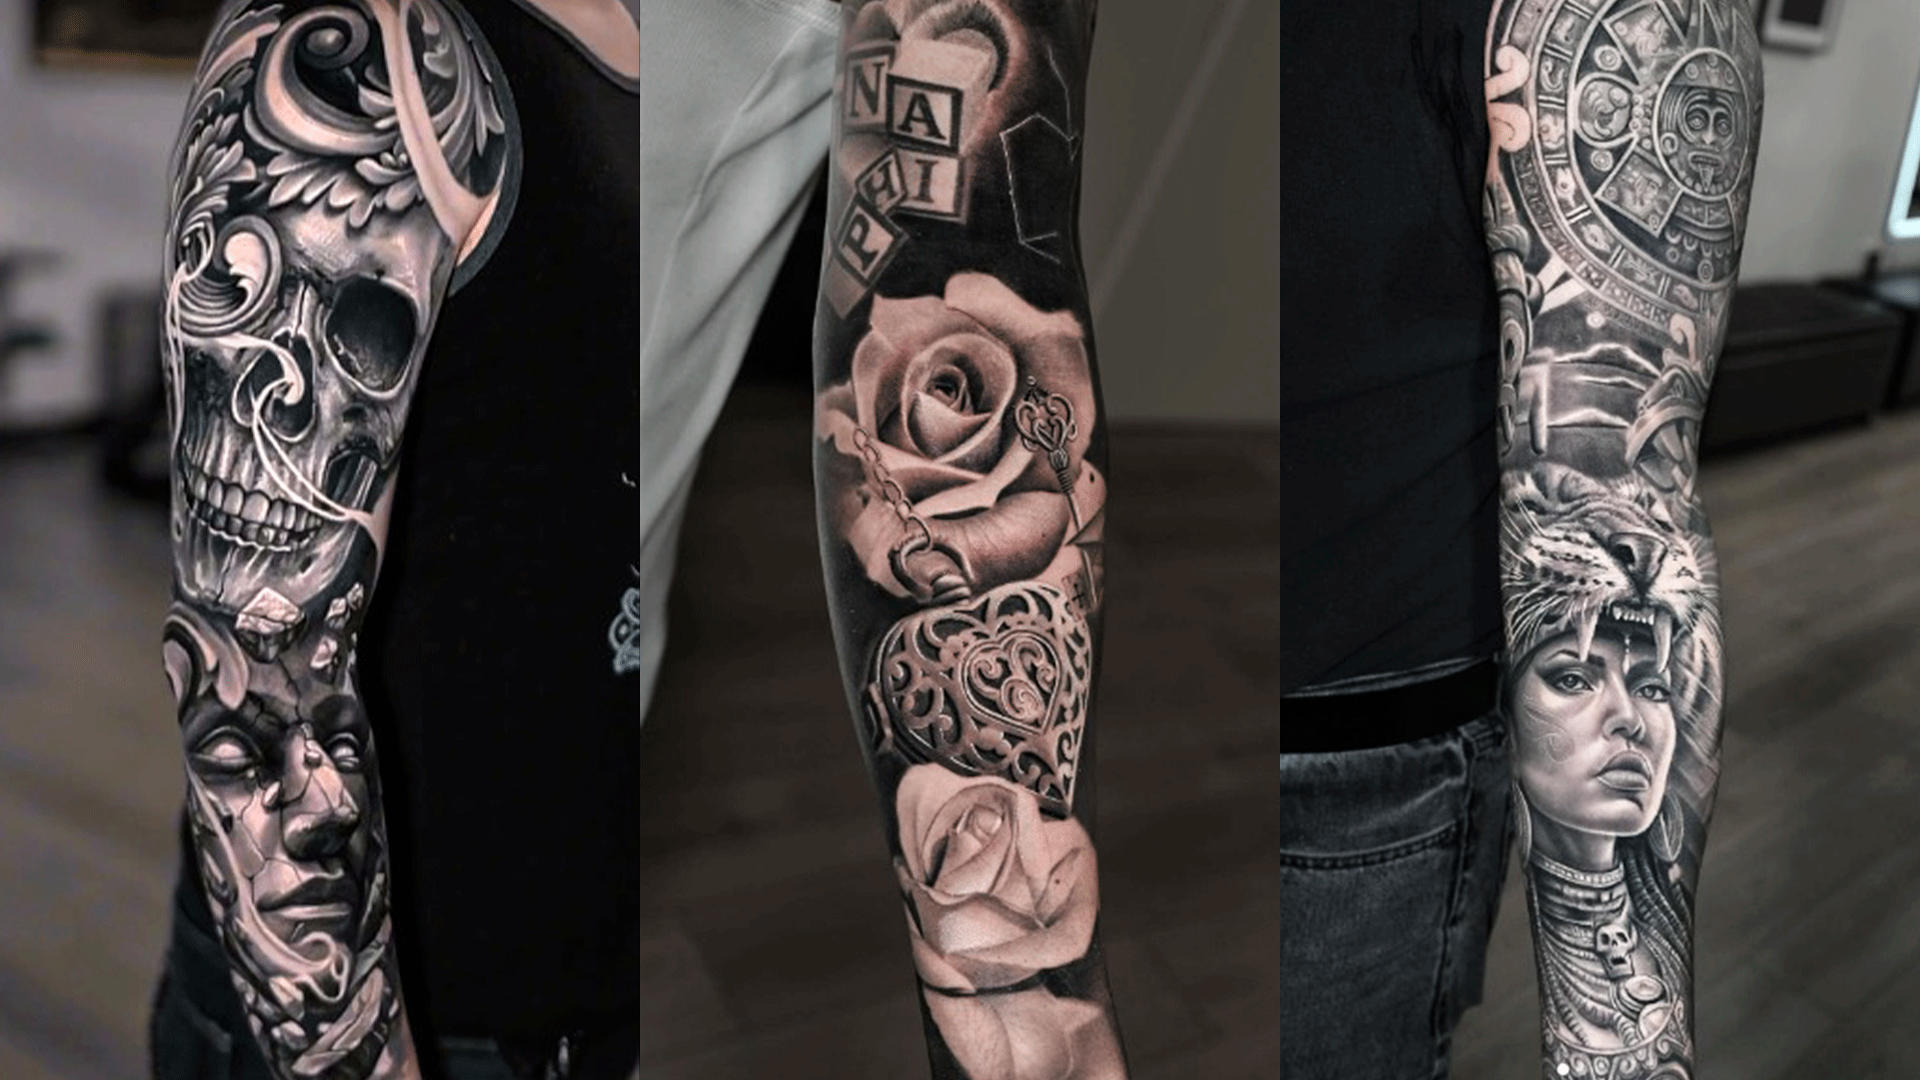 Death Skull Flower Temporary Sleeve Tattoos Female Sticker For Women And  Girls Snake, Bird, Peony, Black Blossom Sexy Transfer Adult Z0403 From  Misihan09, $4.05 | DHgate.Com